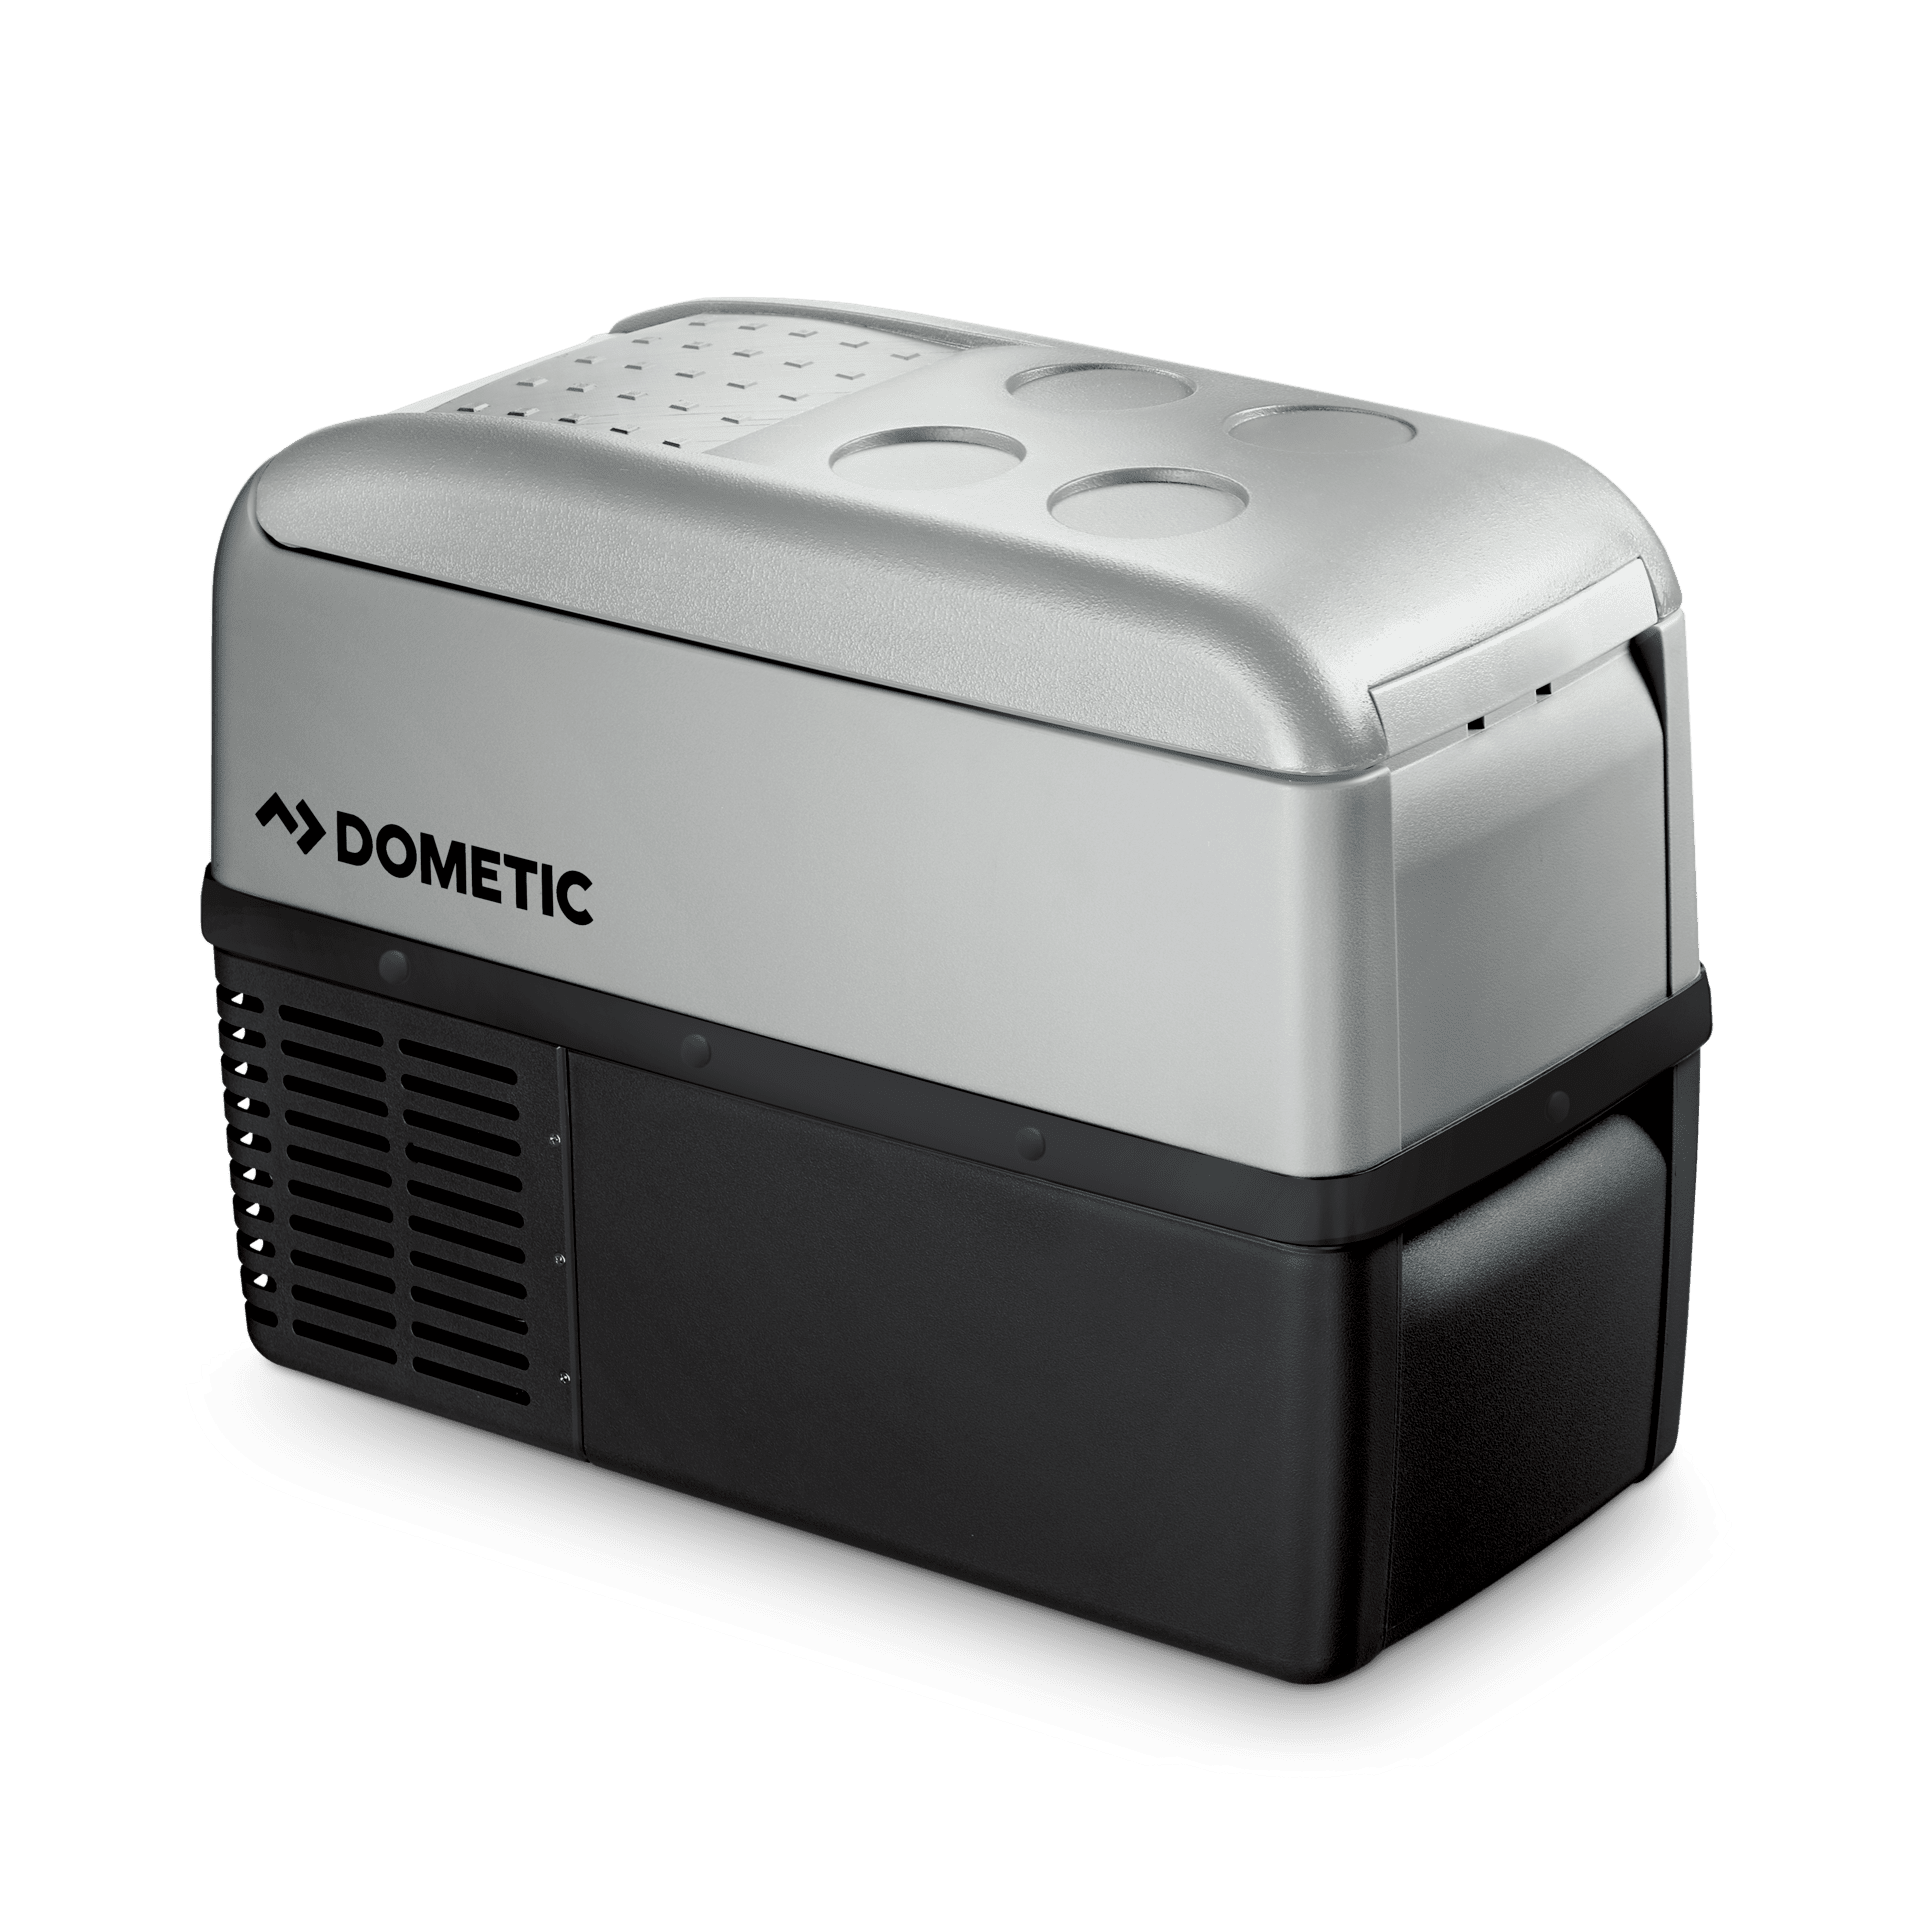 Dometic COOLFREEZE CF 26 - Portable cooler